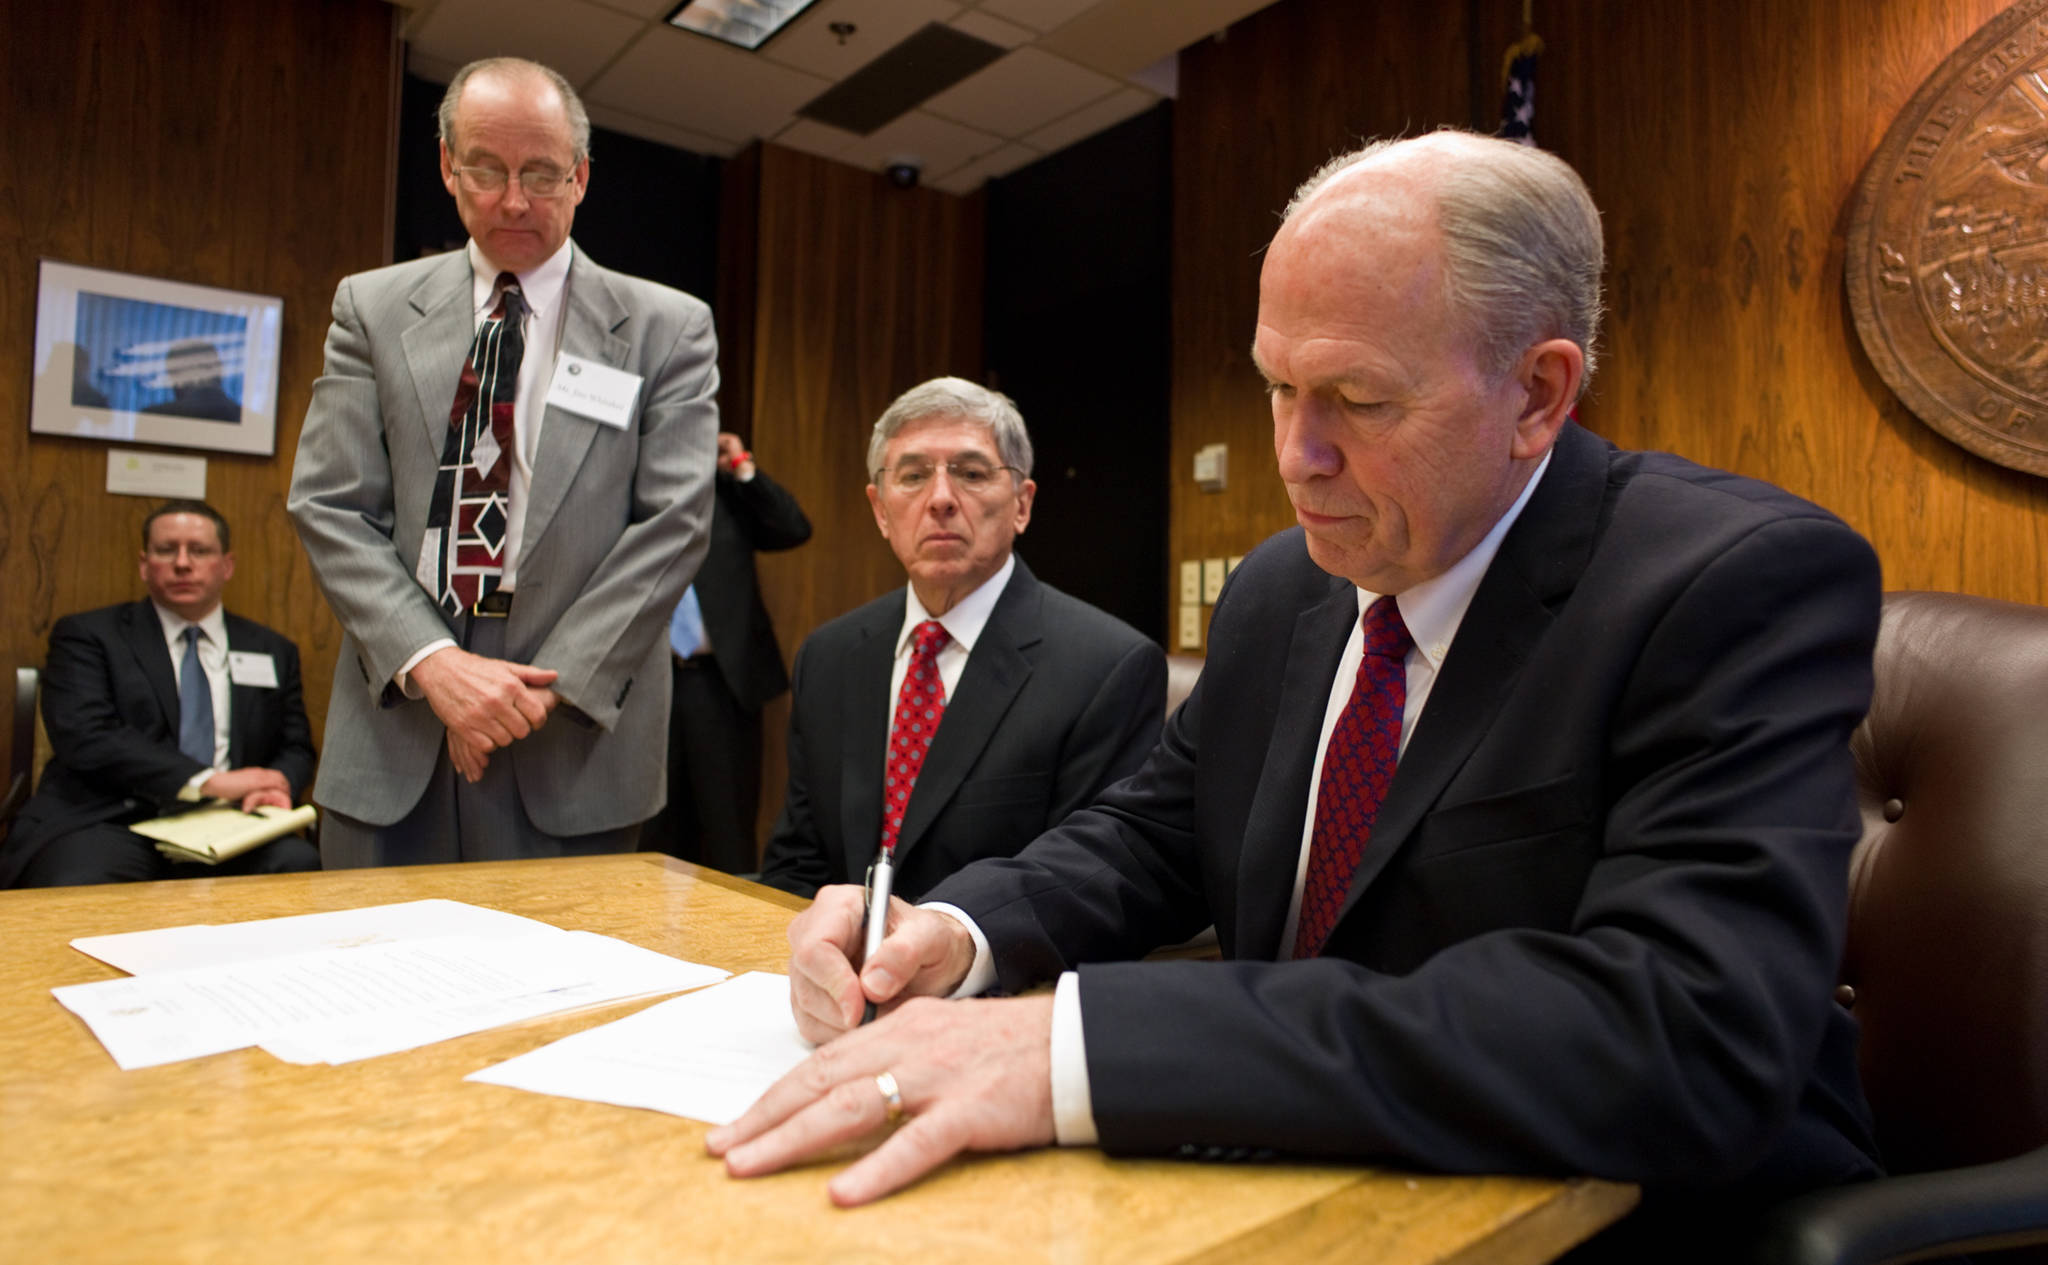 Gov. Bill Walker, right, signs transitional papers in front of Lt. Gov. Byron Mallott, center, and Walker’s Chief of Staff, Jim Whitaker, at the Capitol. Walker and Mallott were sworn into office just hours before.